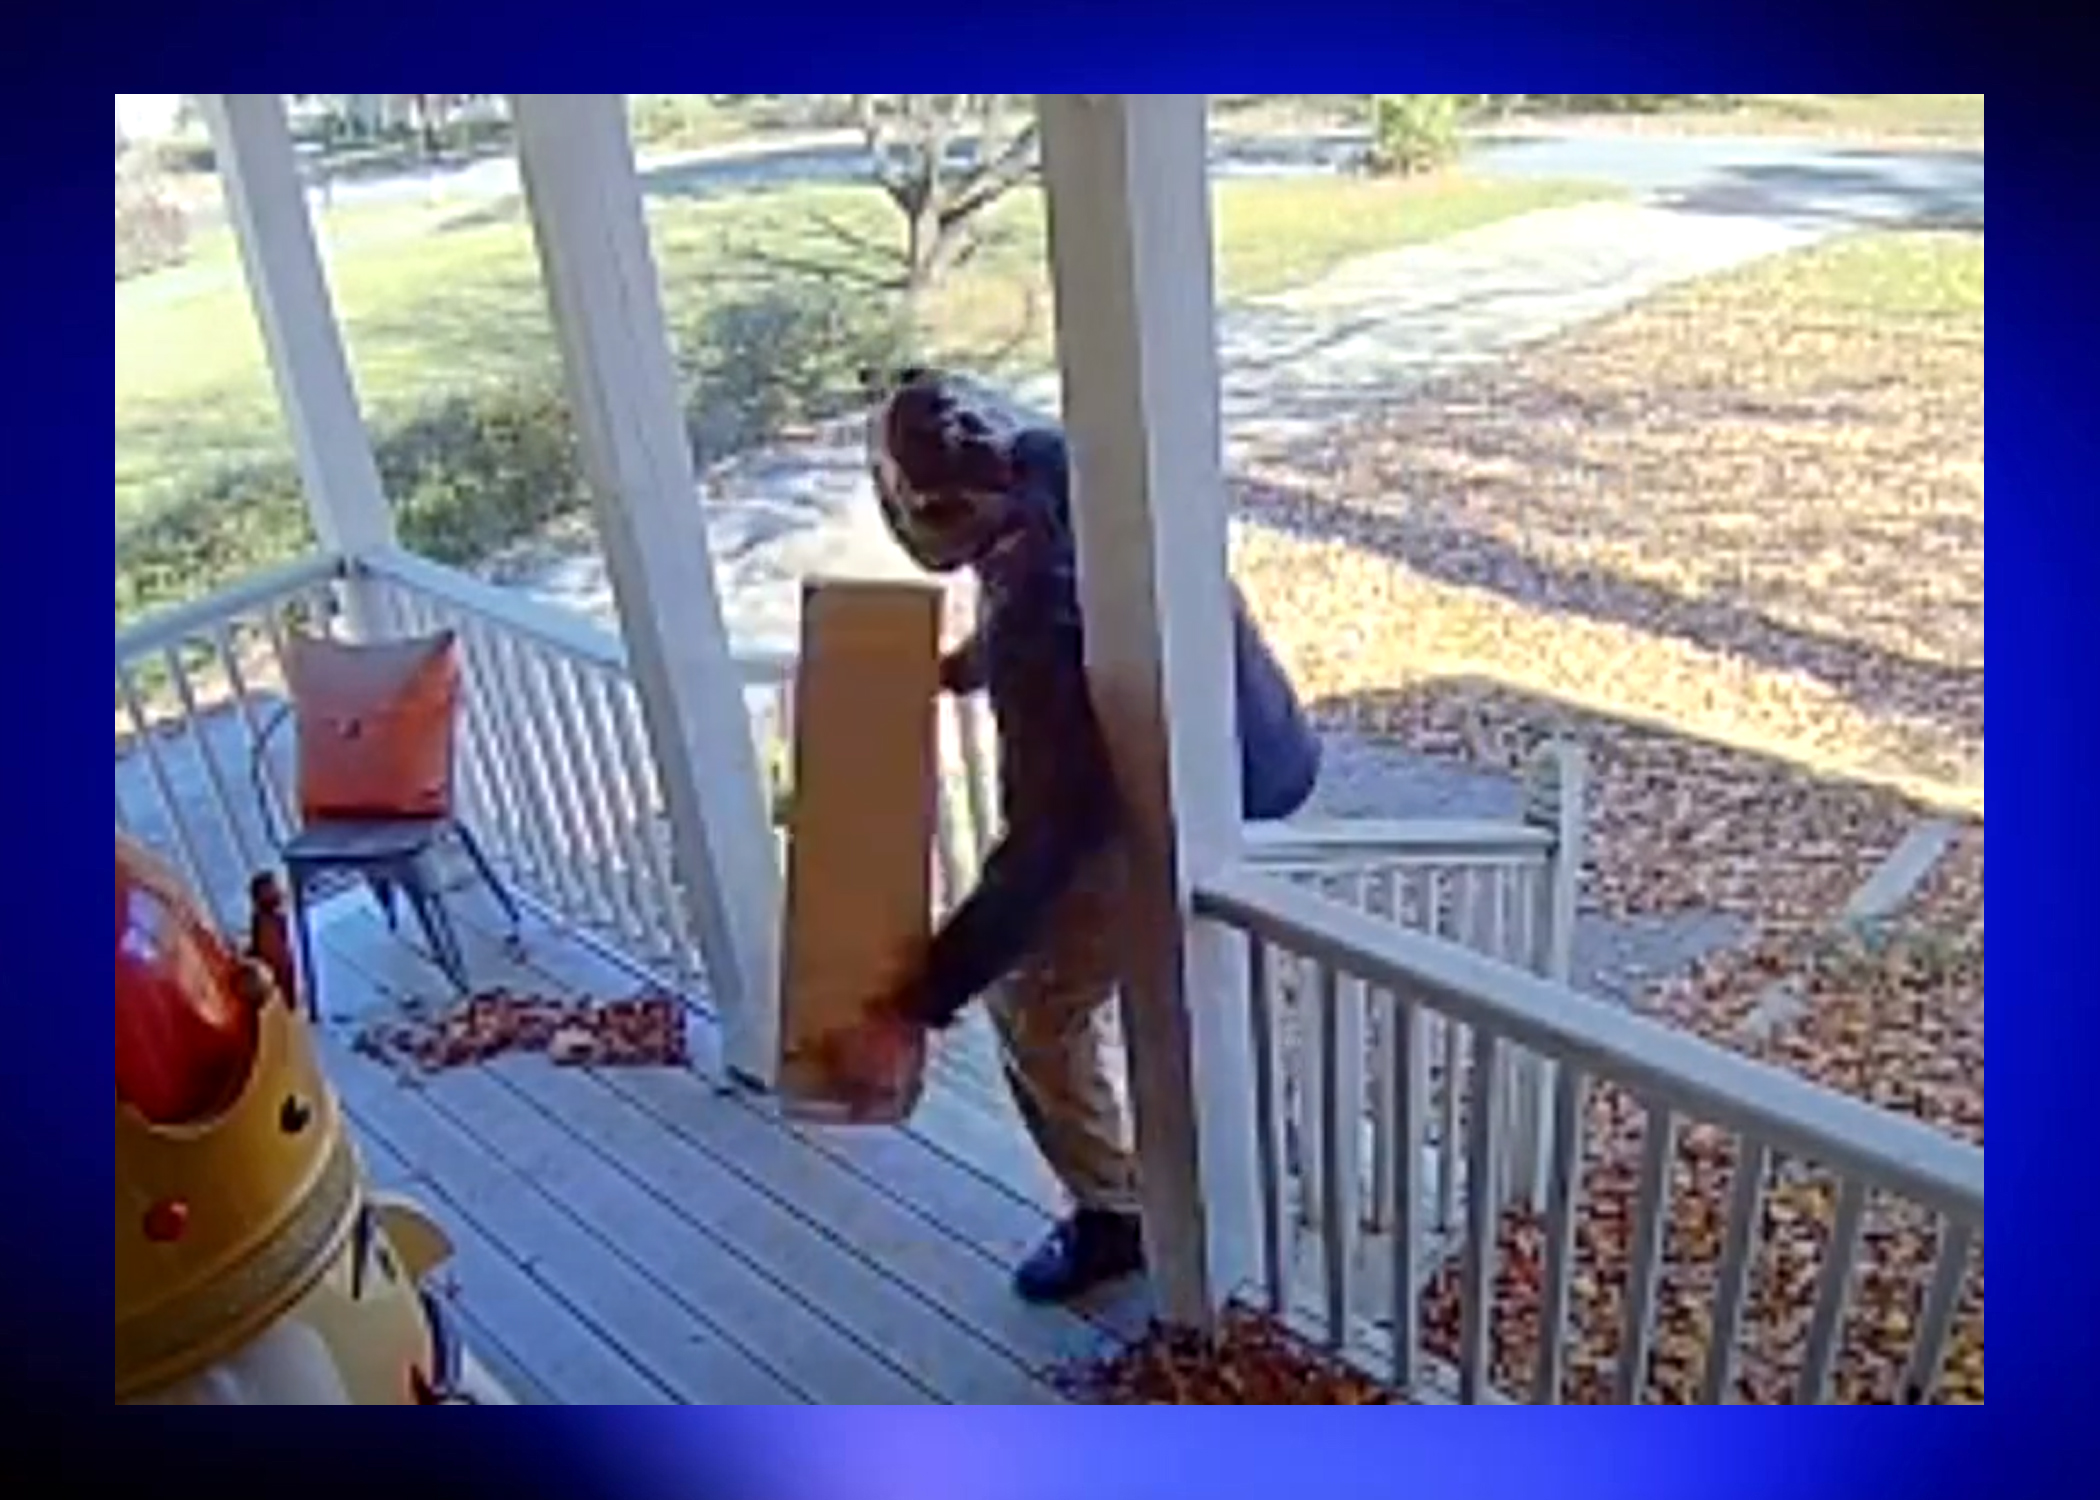 Caught on camera: Porch pirate snatching package from Trussville home